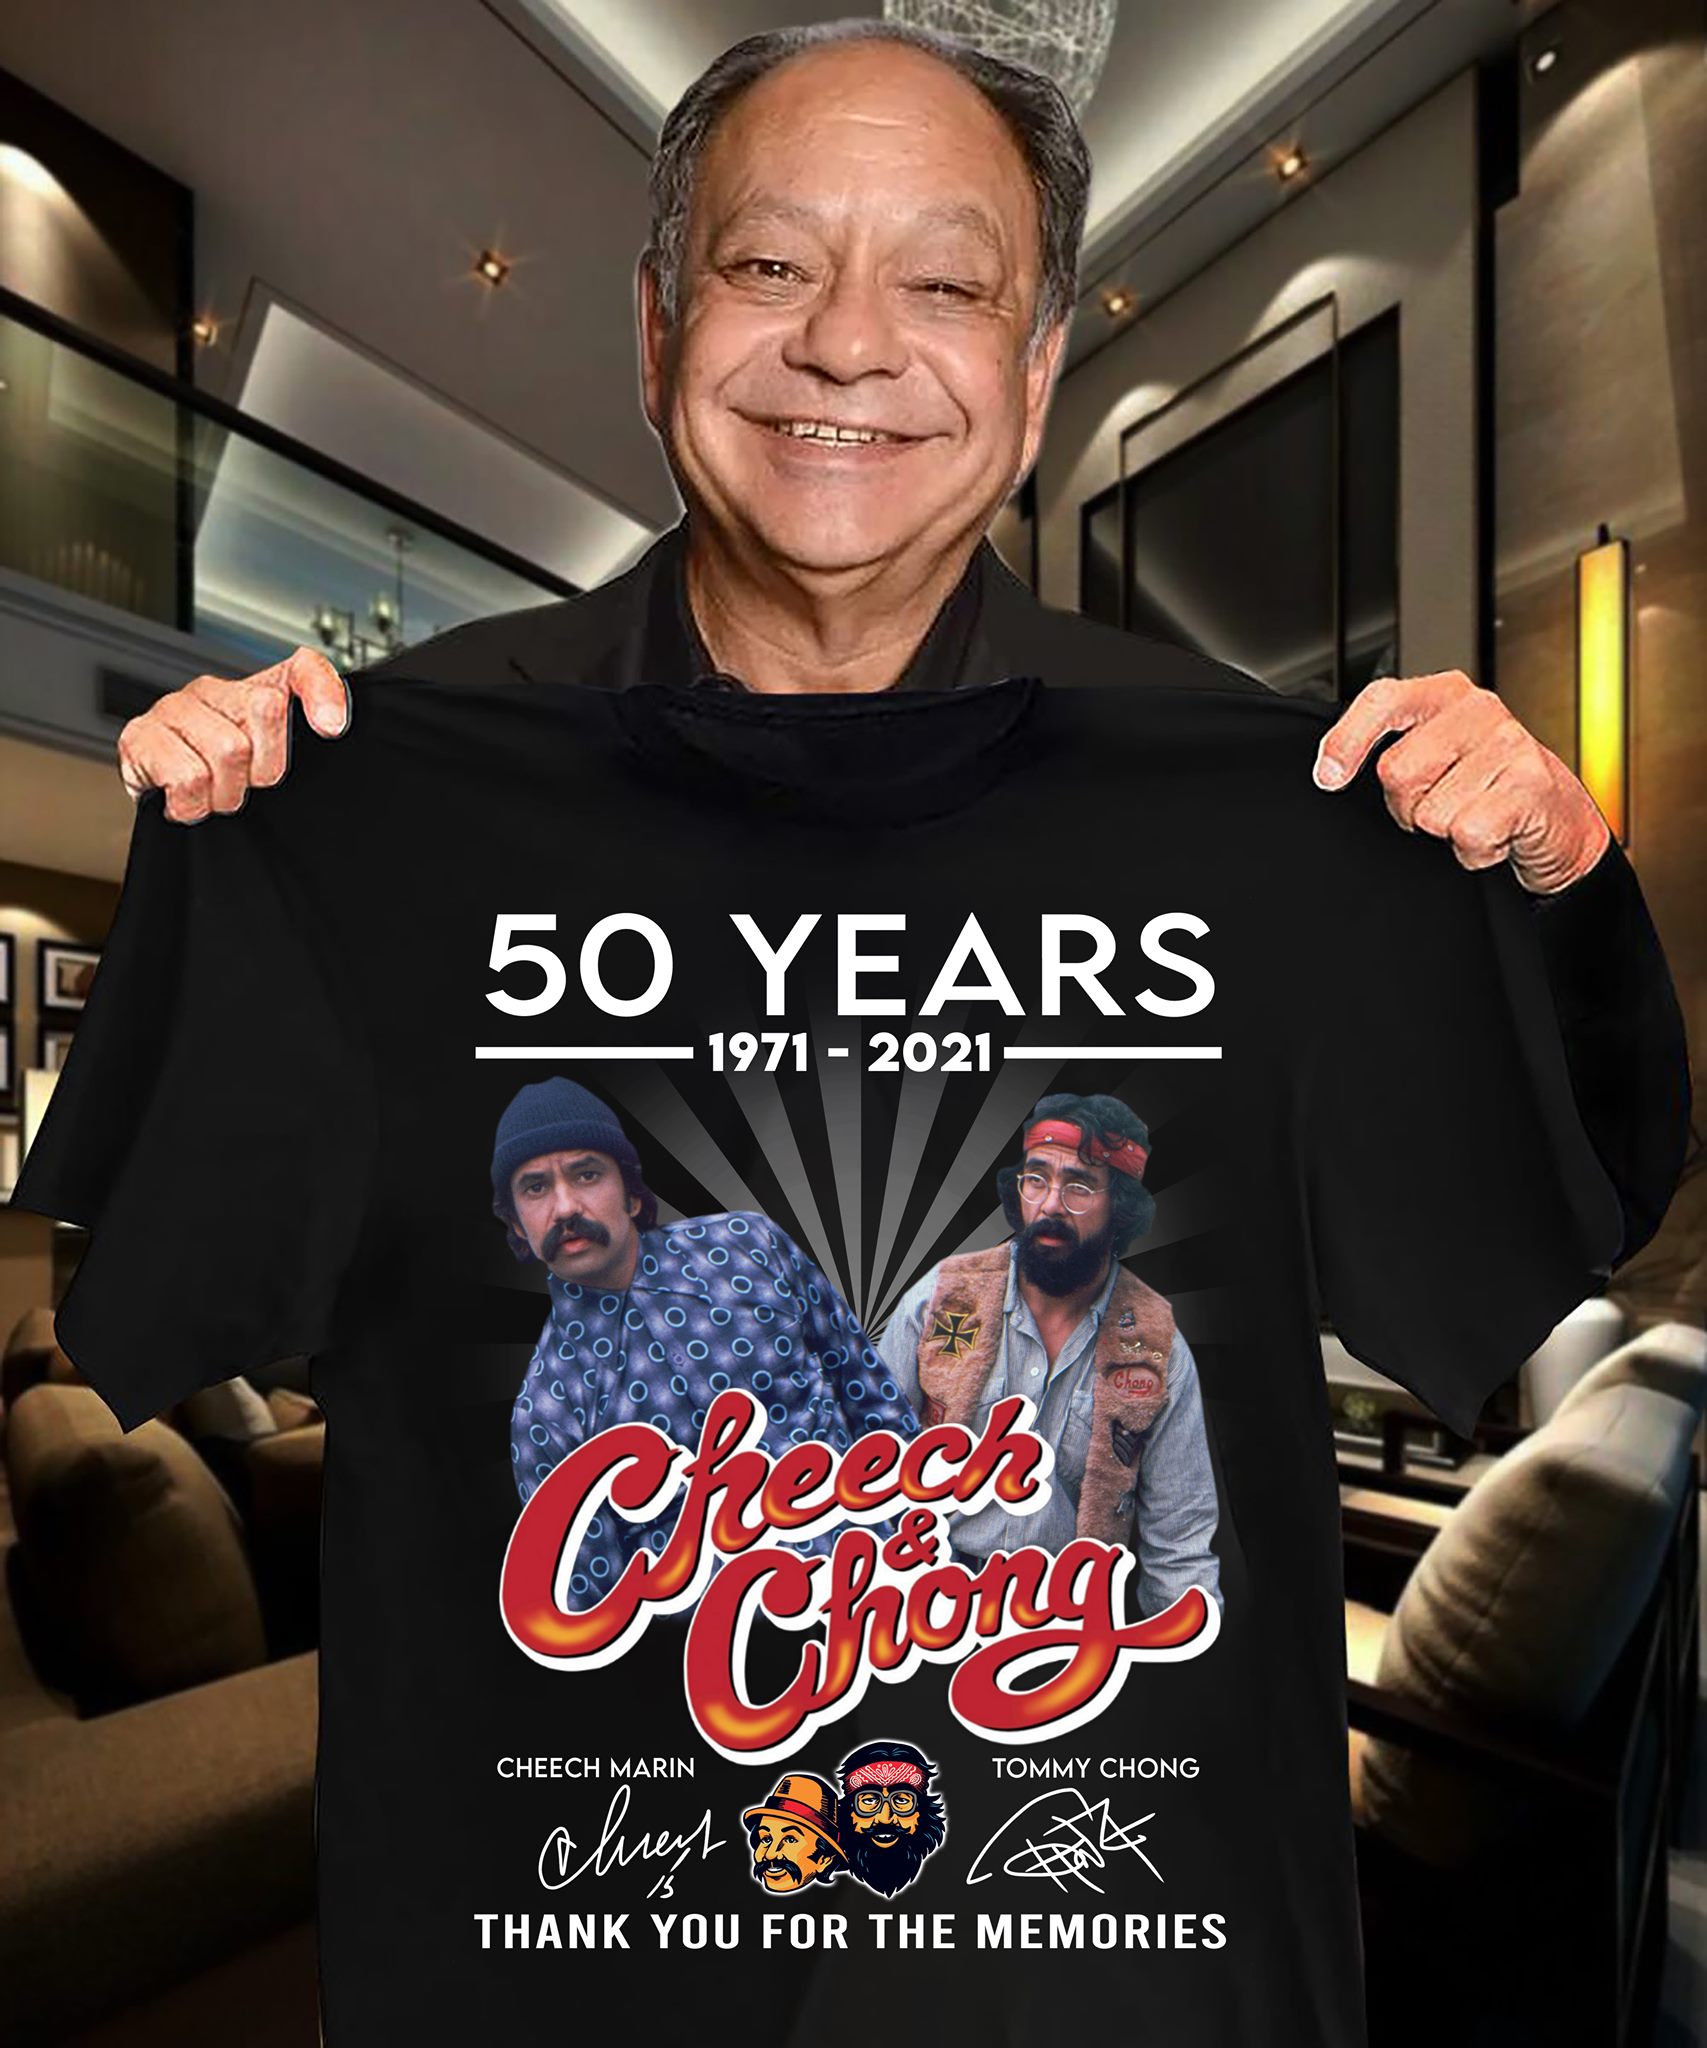 50 years 1971 – 2021 Cheech and Chong Thank you for the memories